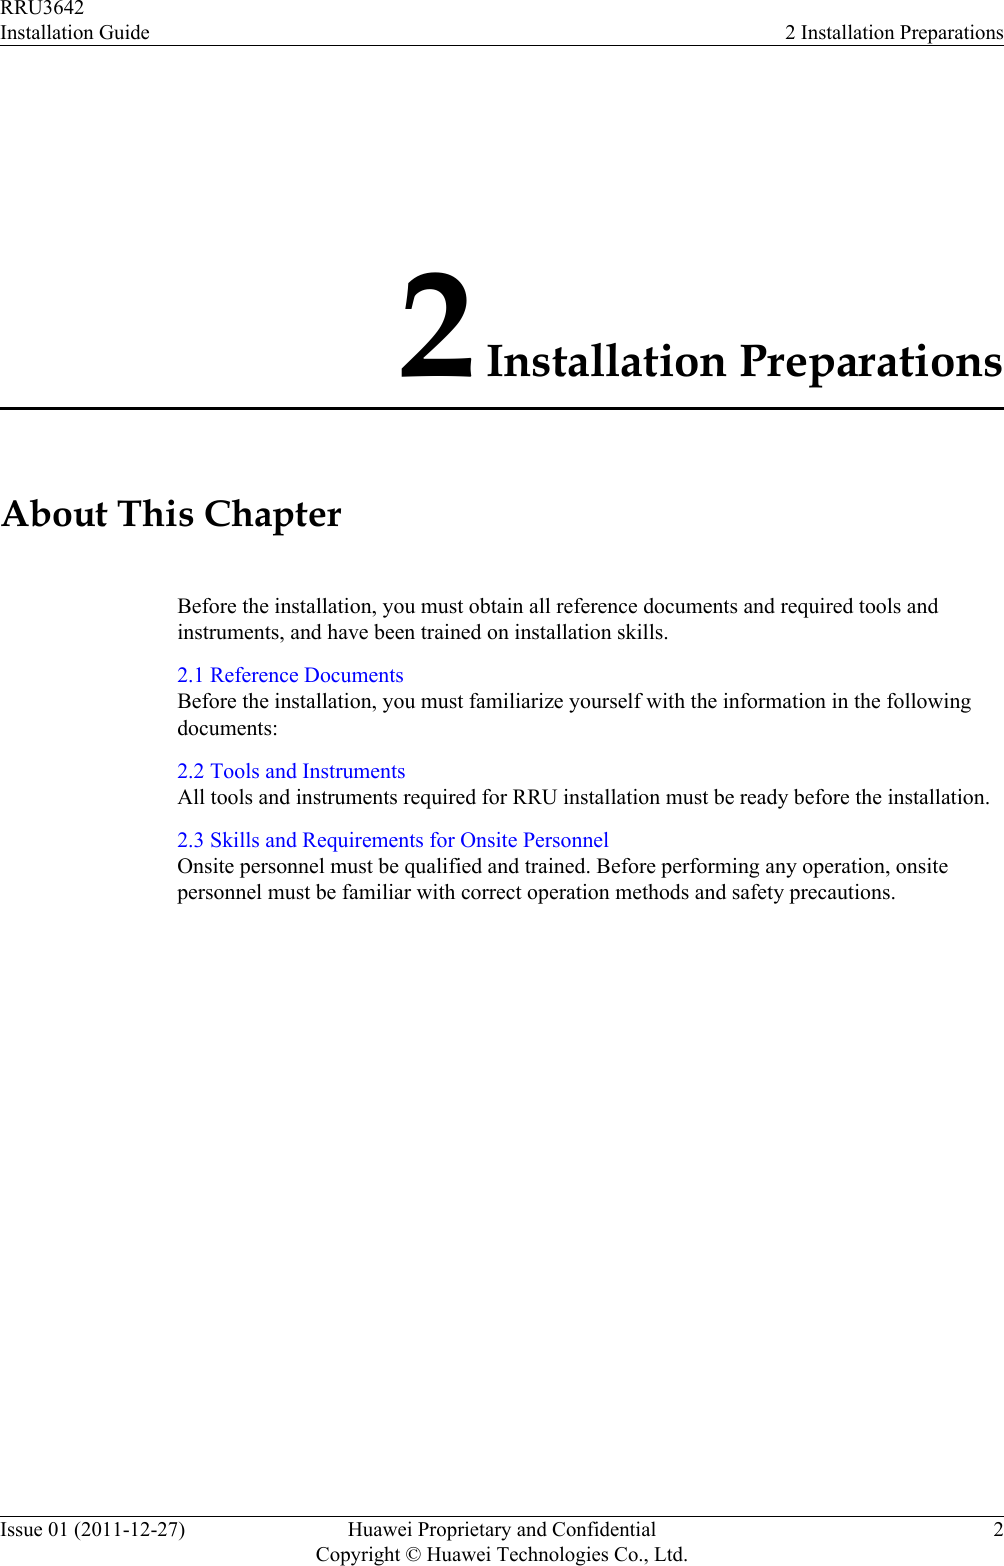 2 Installation PreparationsAbout This ChapterBefore the installation, you must obtain all reference documents and required tools andinstruments, and have been trained on installation skills.2.1 Reference DocumentsBefore the installation, you must familiarize yourself with the information in the followingdocuments:2.2 Tools and InstrumentsAll tools and instruments required for RRU installation must be ready before the installation.2.3 Skills and Requirements for Onsite PersonnelOnsite personnel must be qualified and trained. Before performing any operation, onsitepersonnel must be familiar with correct operation methods and safety precautions.RRU3642Installation Guide 2 Installation PreparationsIssue 01 (2011-12-27) Huawei Proprietary and ConfidentialCopyright © Huawei Technologies Co., Ltd.2